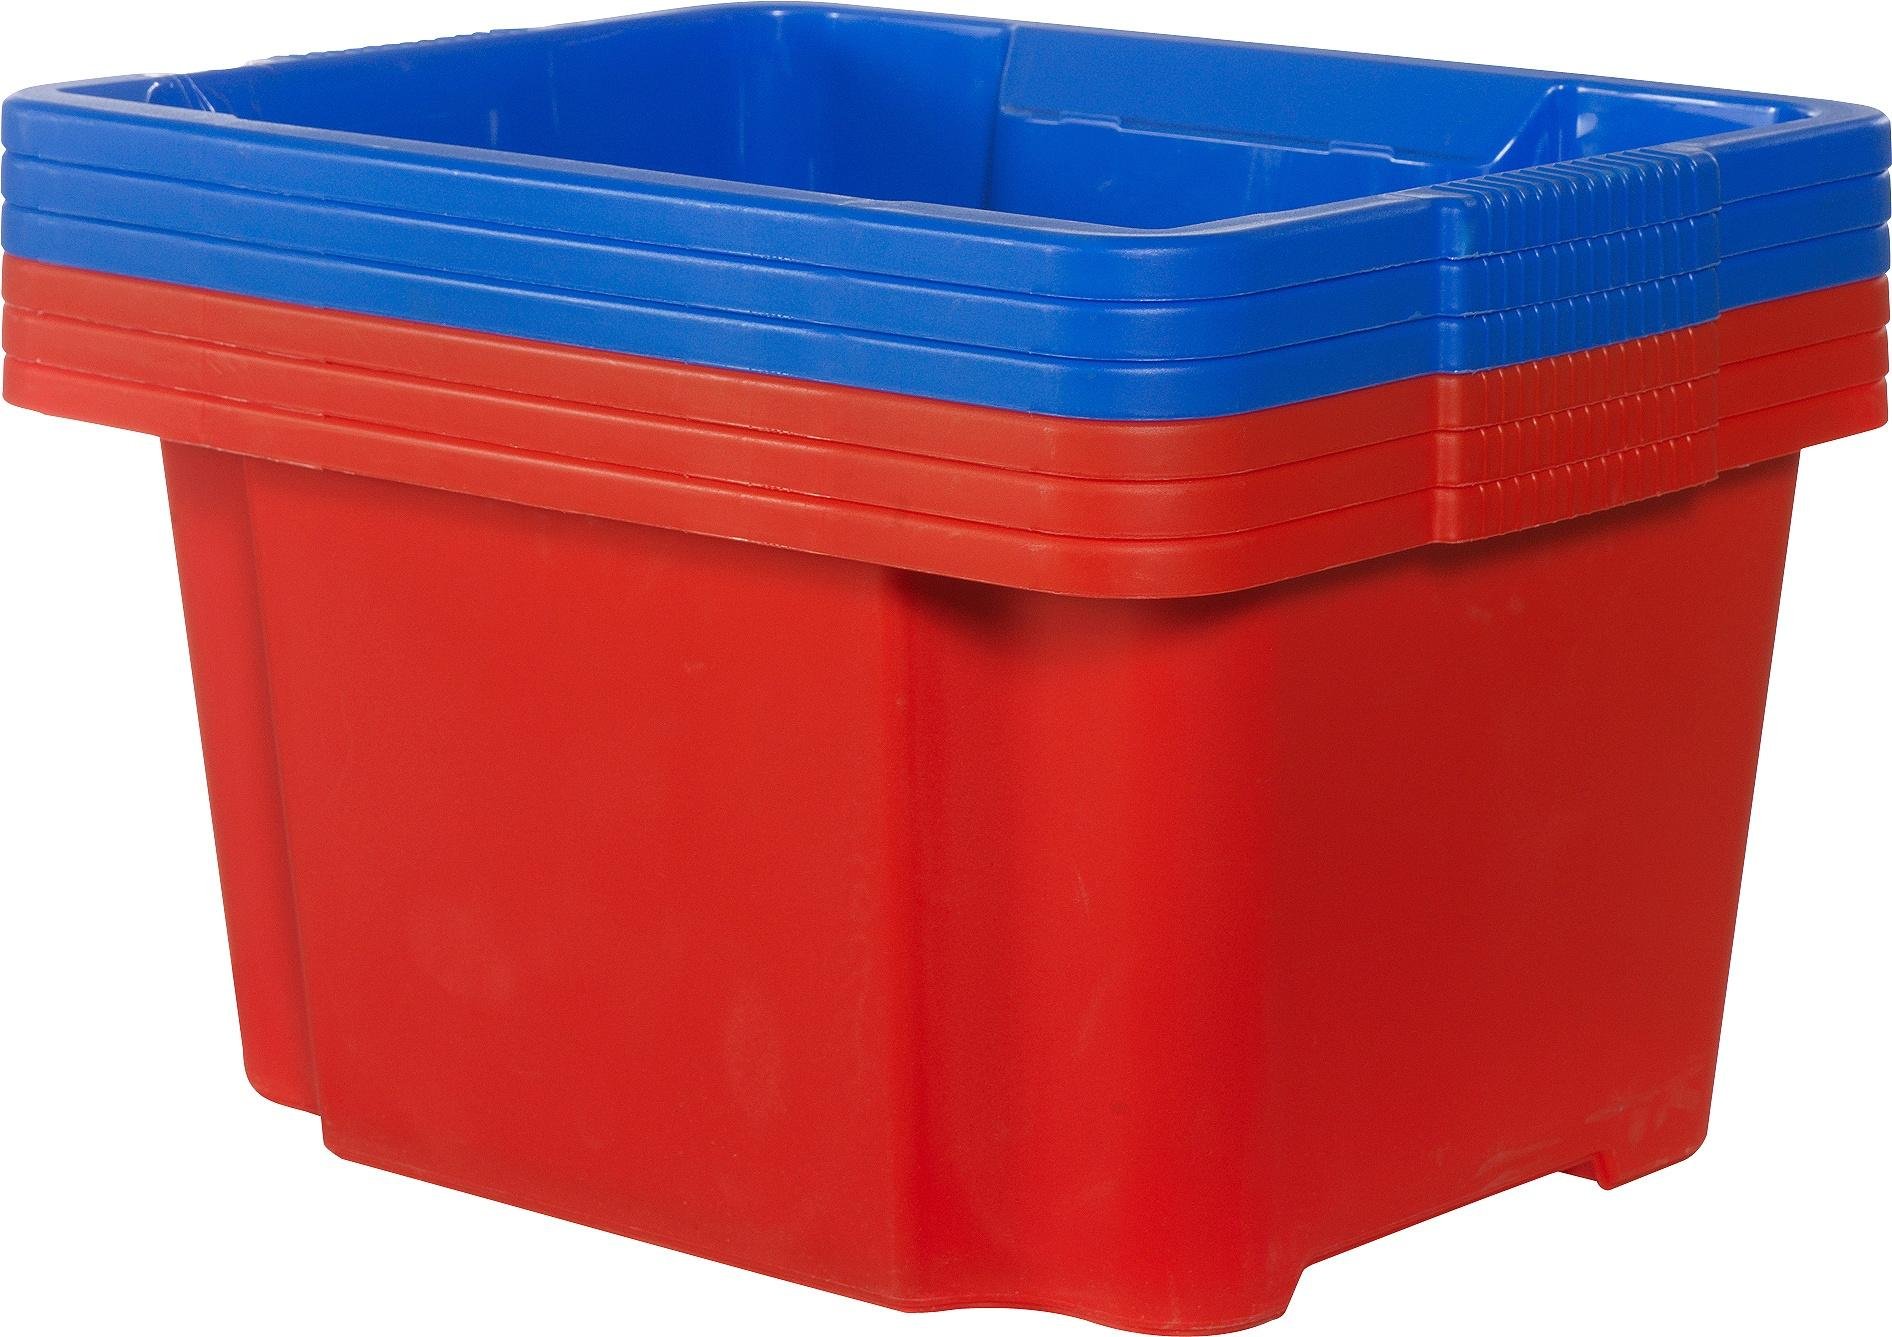 Argos Home Set of 6 Blue & Red Plastic Stack & Nest Boxes